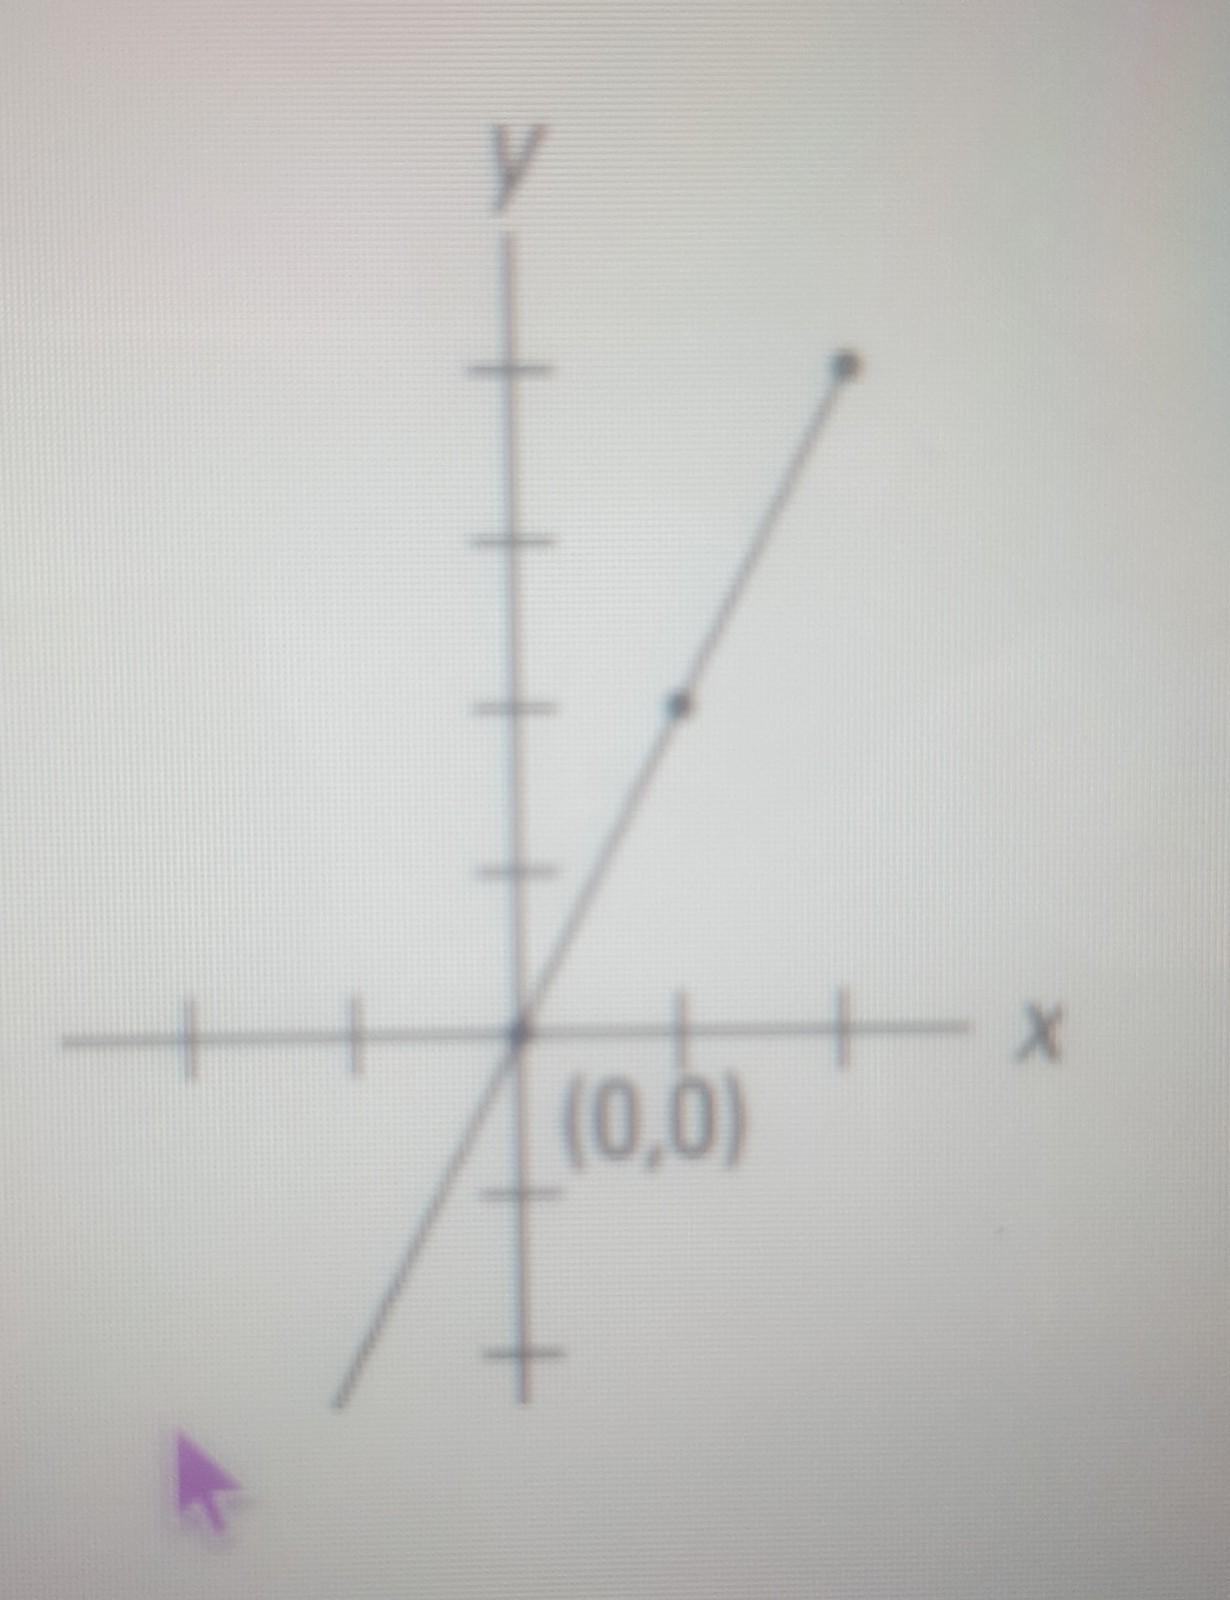 PLEASE ANSWER QUICKLY IN TEST NOW!!! 10 POINTS AND PHONE ABOUT TO DIE!!In The Graph Below, What Is The